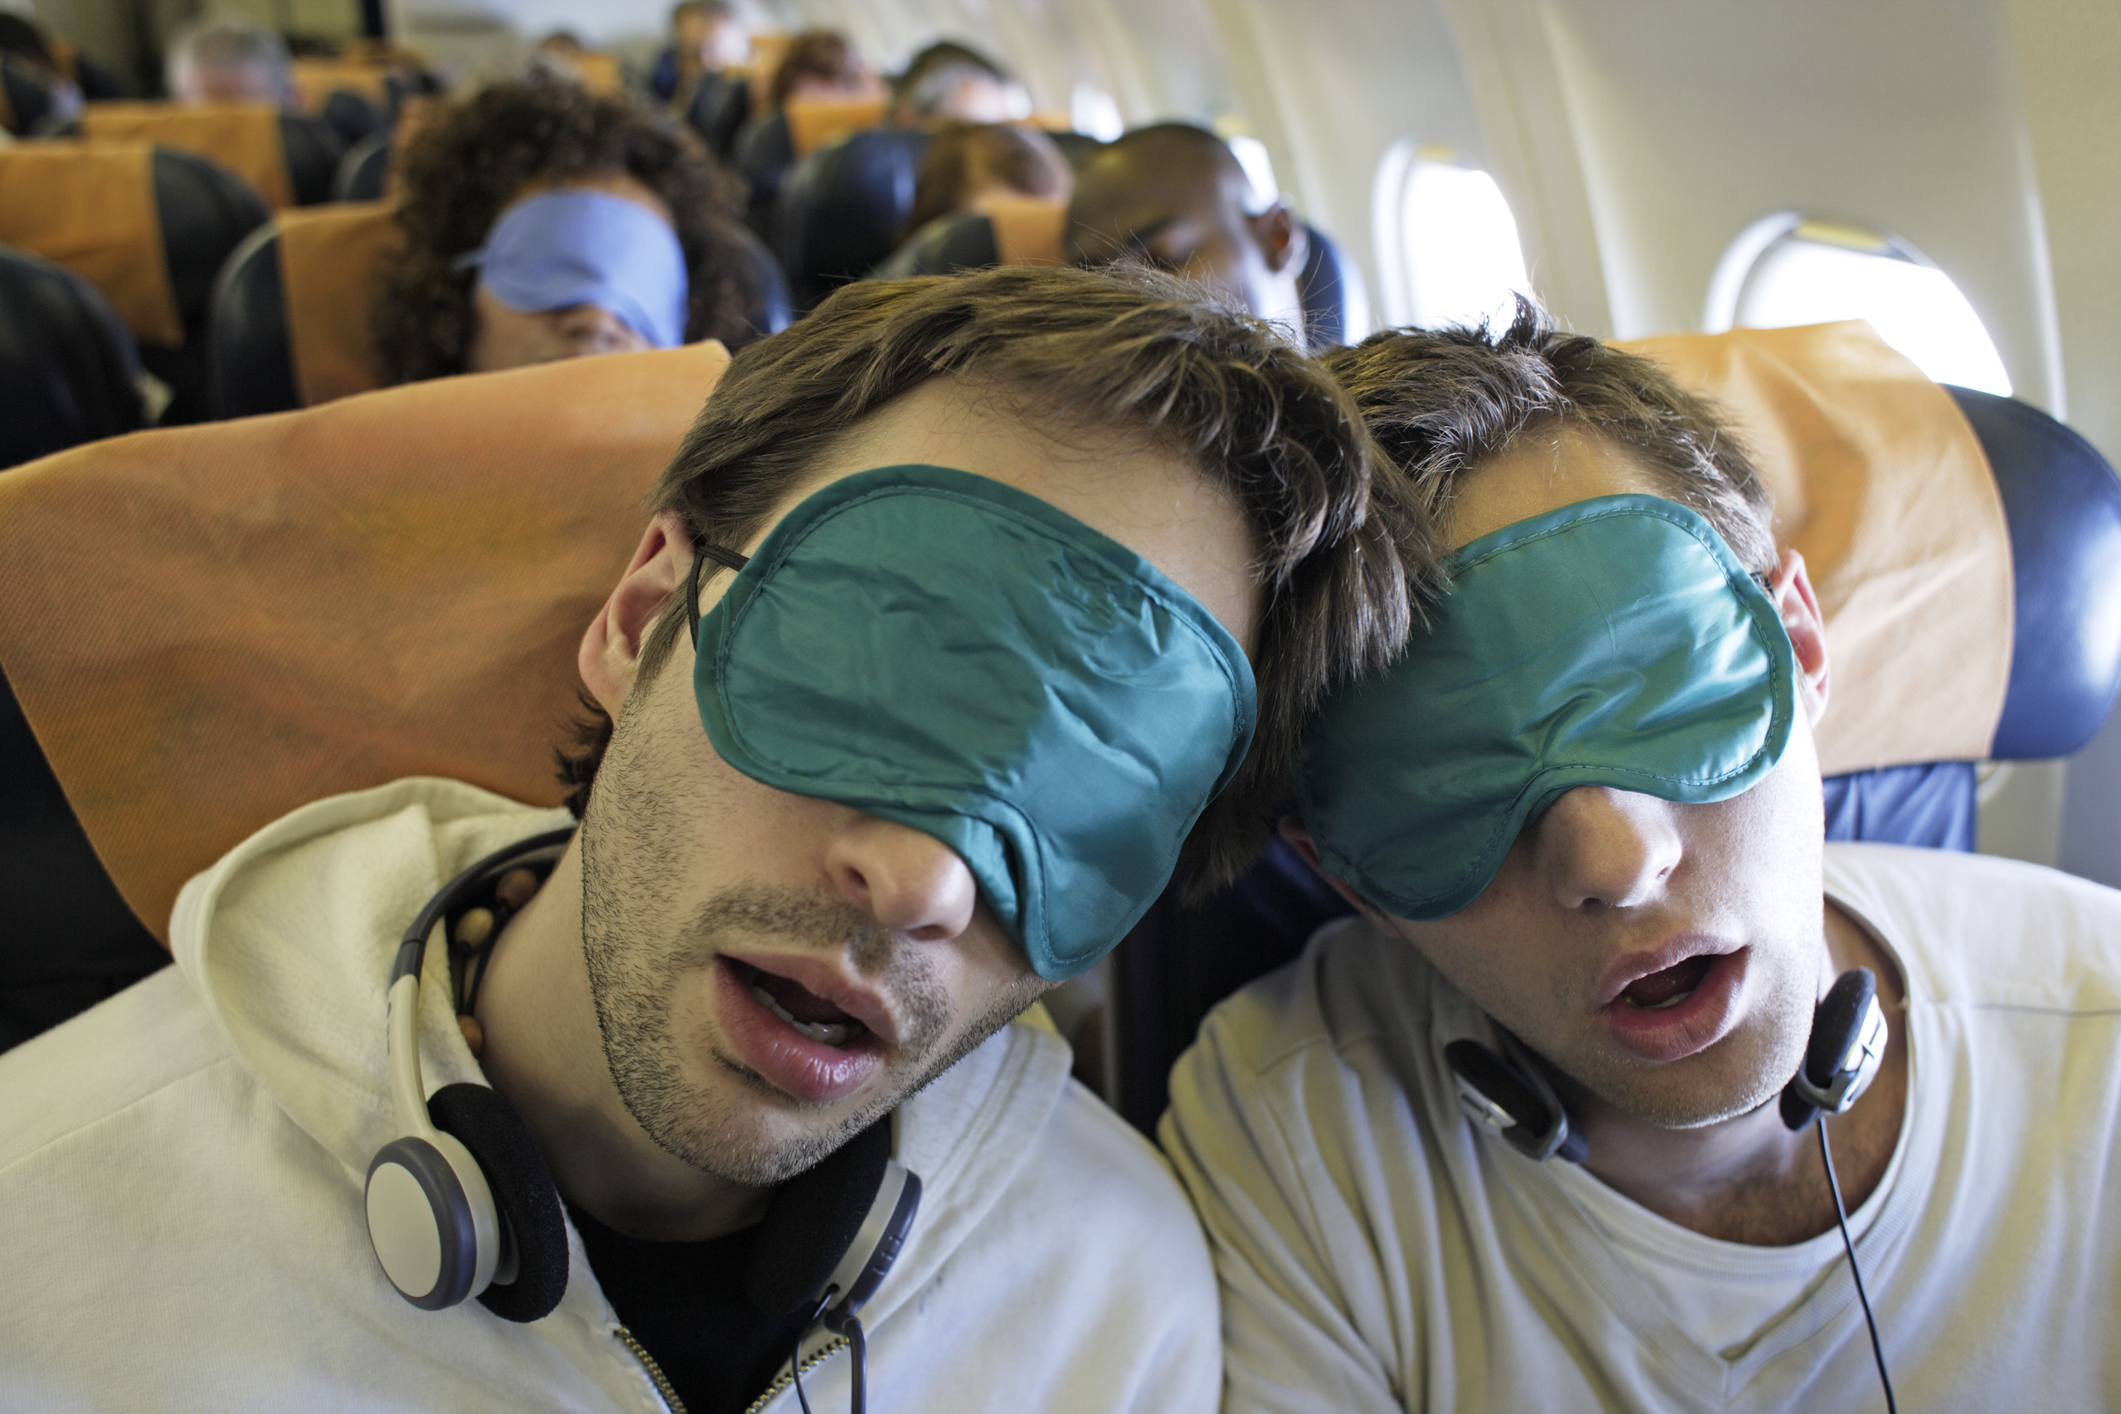 Two people sleeping on a plane